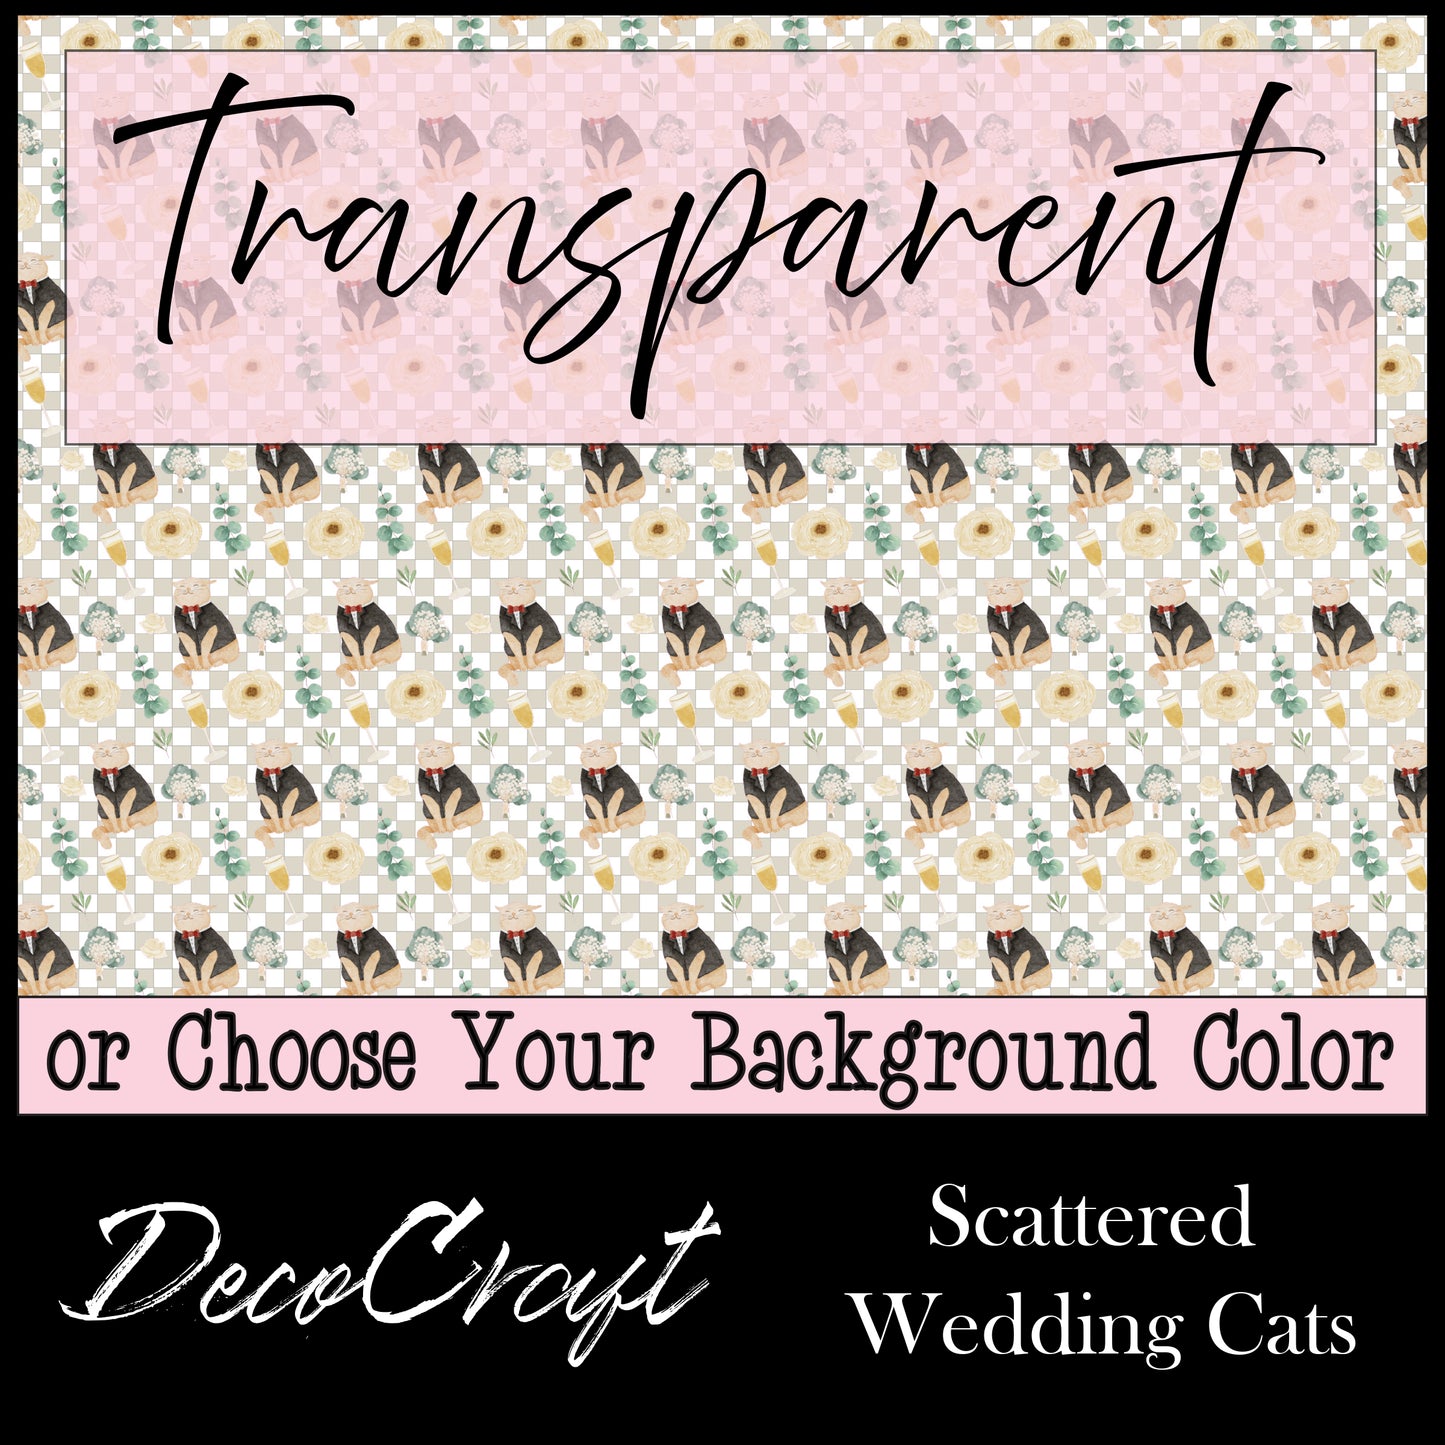 DecoCraft - Wedding - Scattered - Wedding Cats